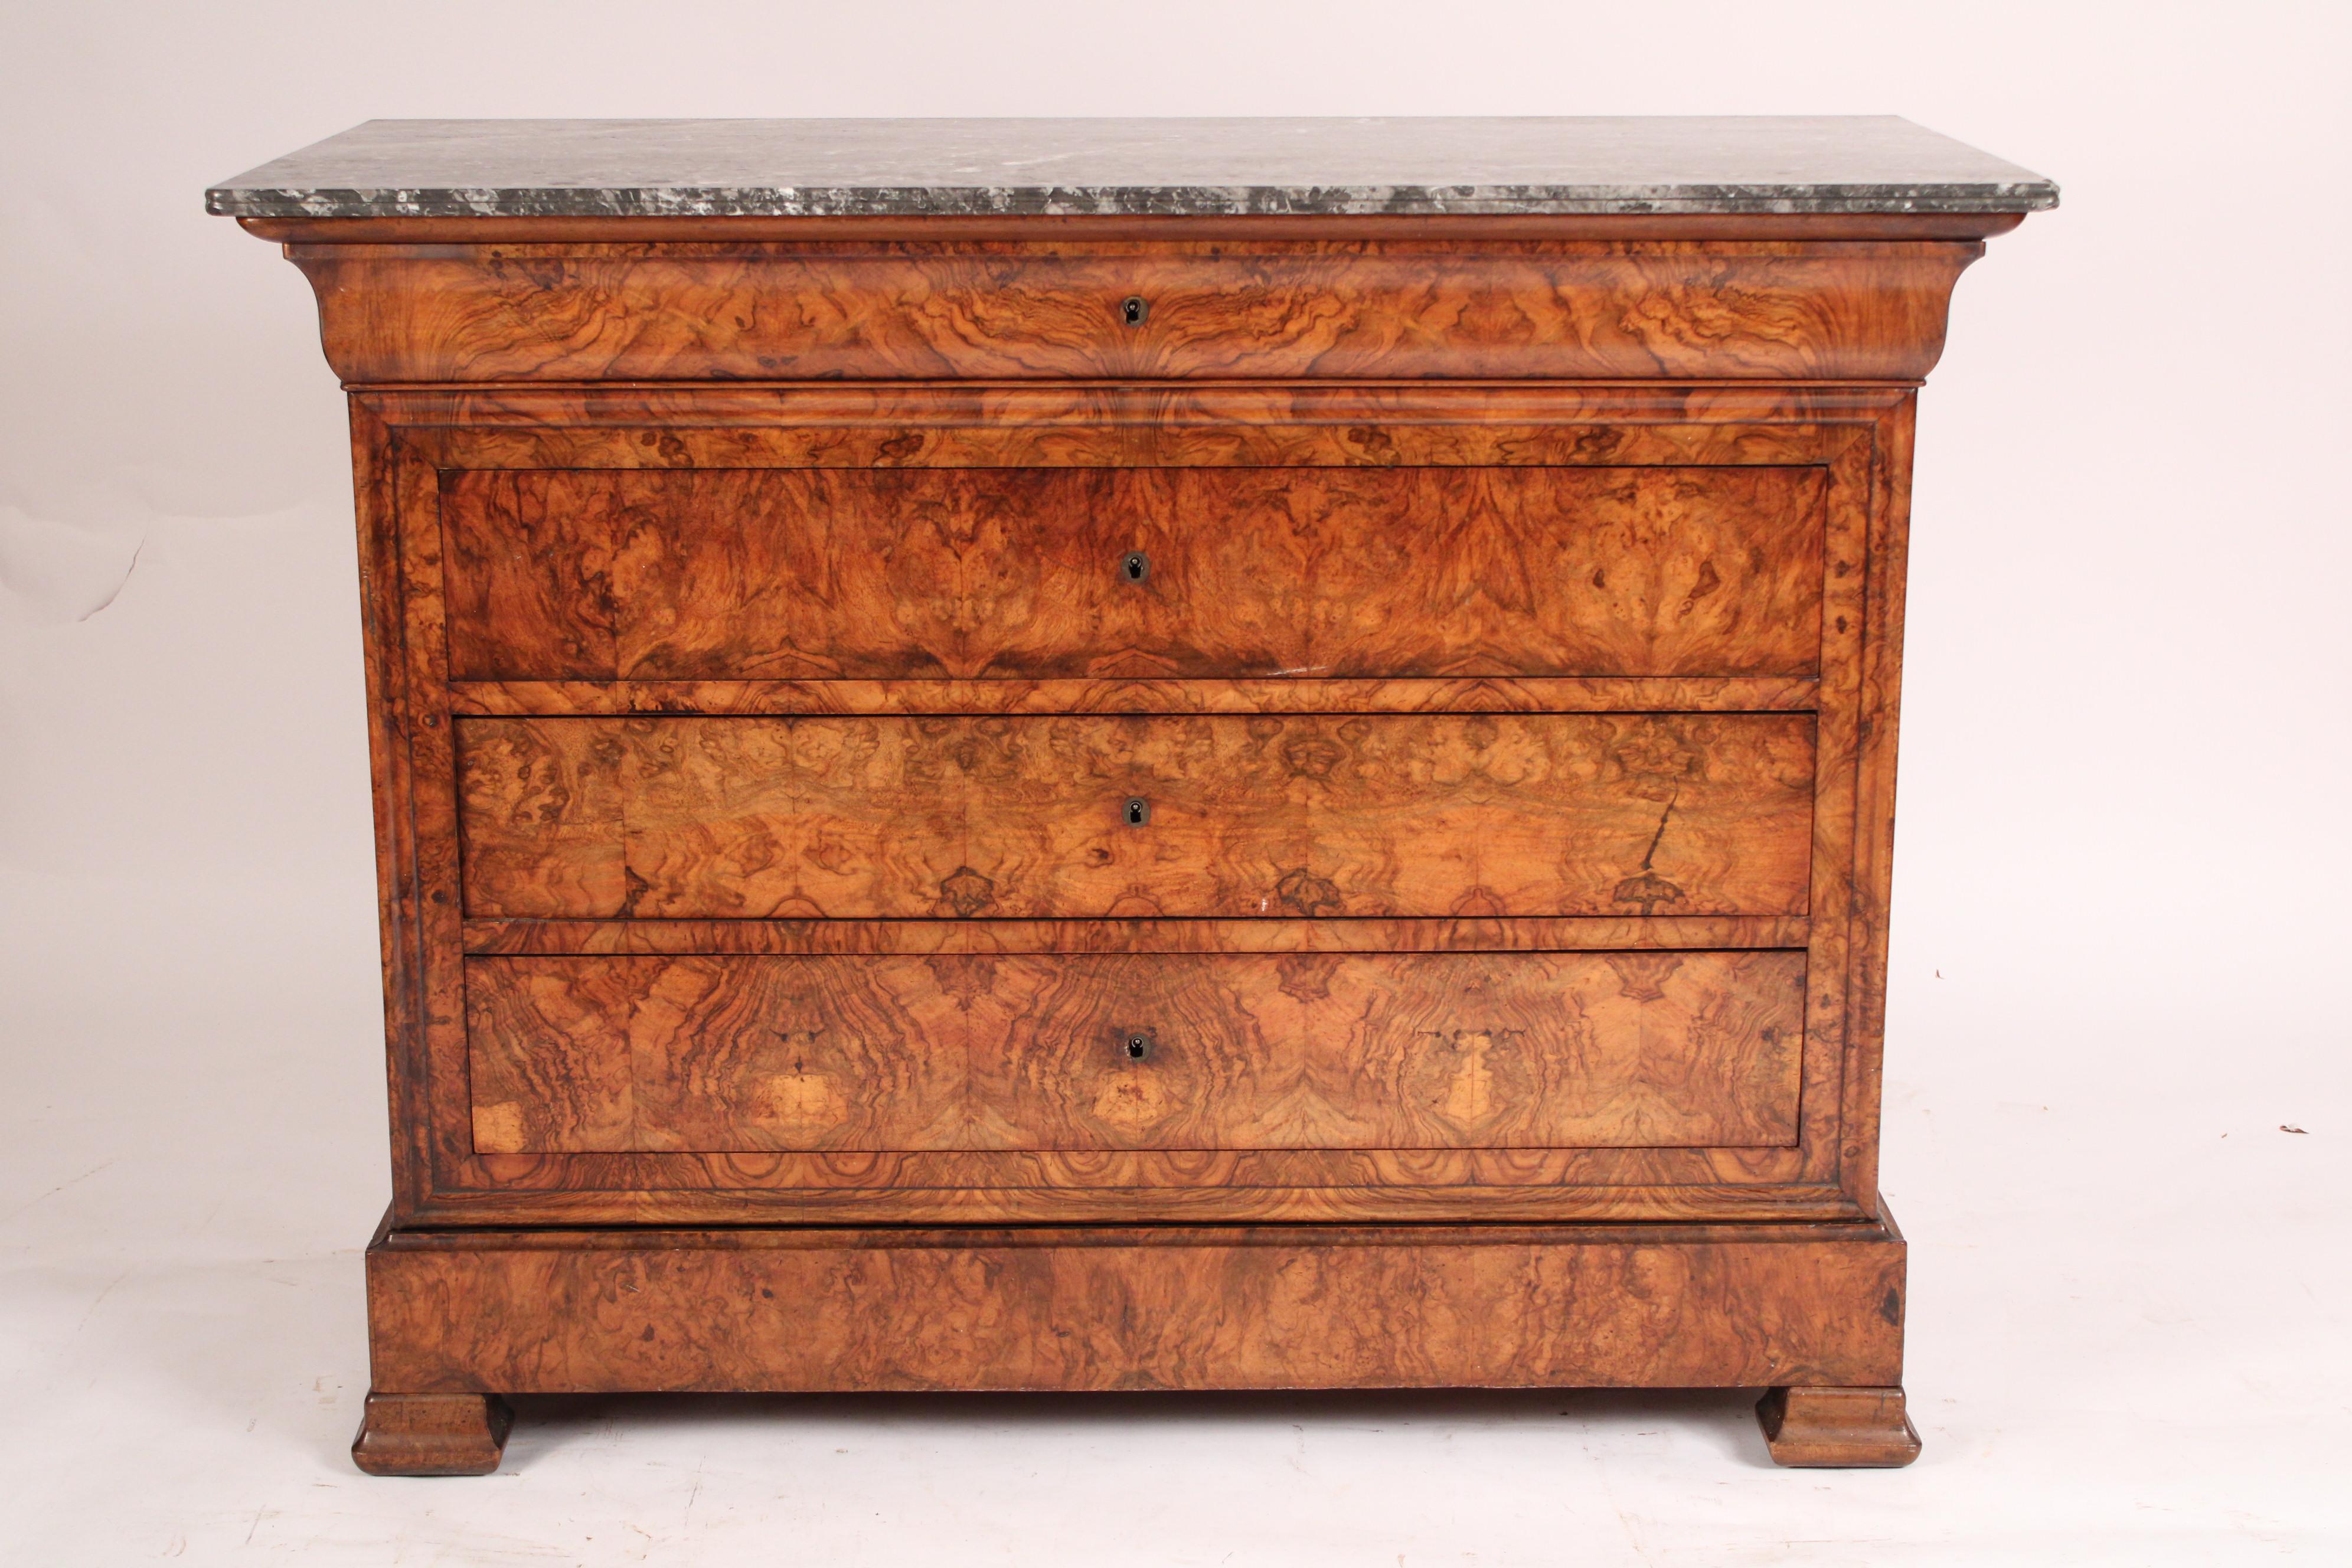 Antique burl walnut and walnut Louis Philippe chest of drawers with marble top, 19th century. With original grey marble top, a small burl walnut frieze drawer above 3 burl walnut drawers and a small drawer in the bottom apron, resting on plinth